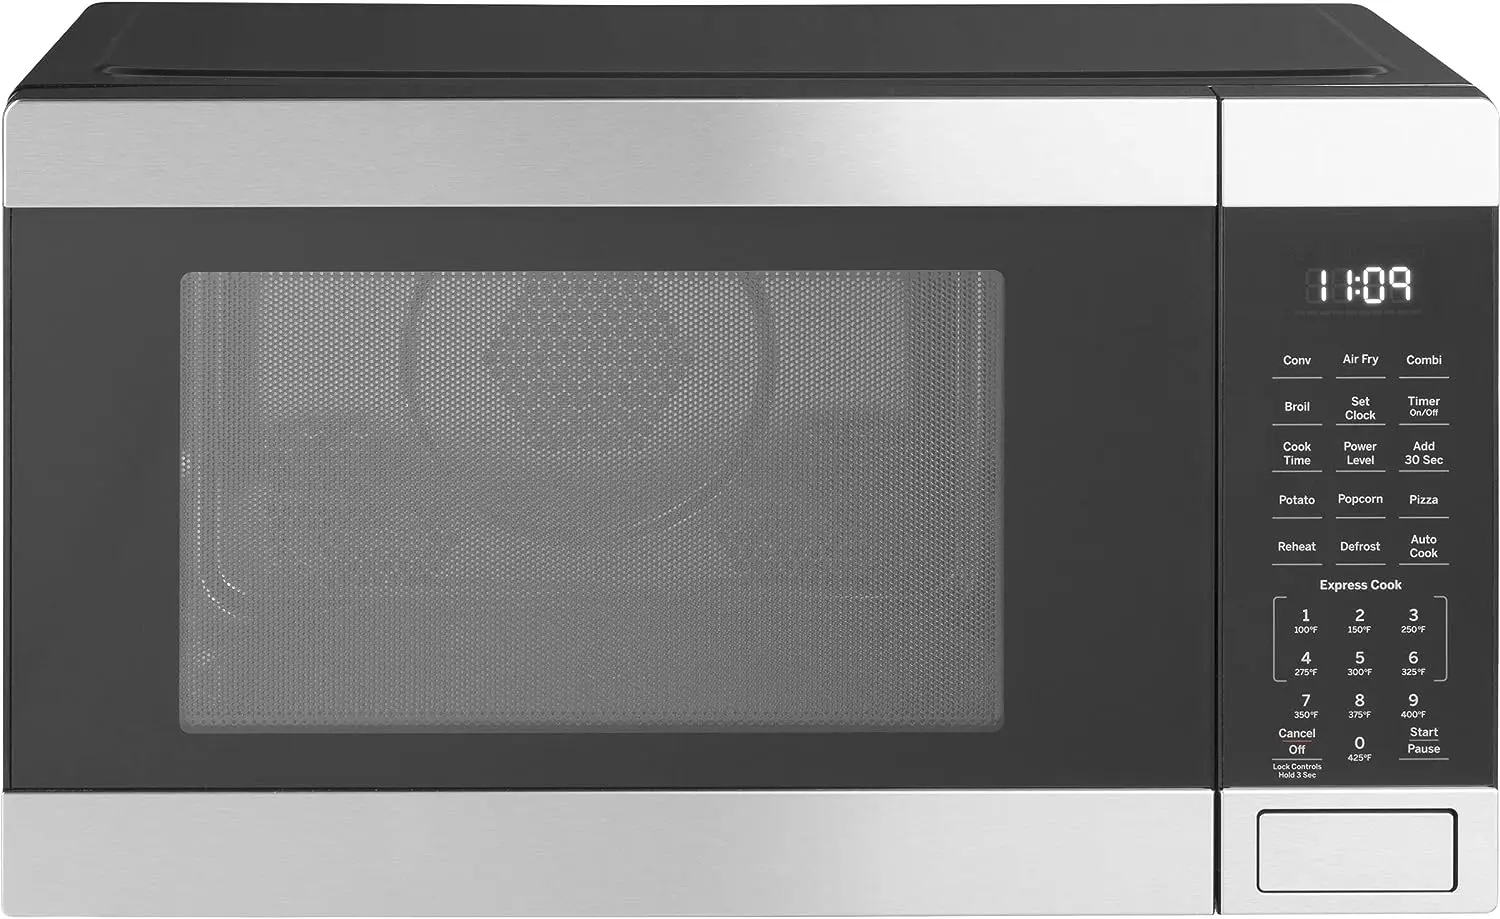 

Countertop Microwave Oven | Complete With Air Fryer, Broiler & Convection Mode | 1.0 Cubic Feet Capacity, 1,050 Watts | Kitc